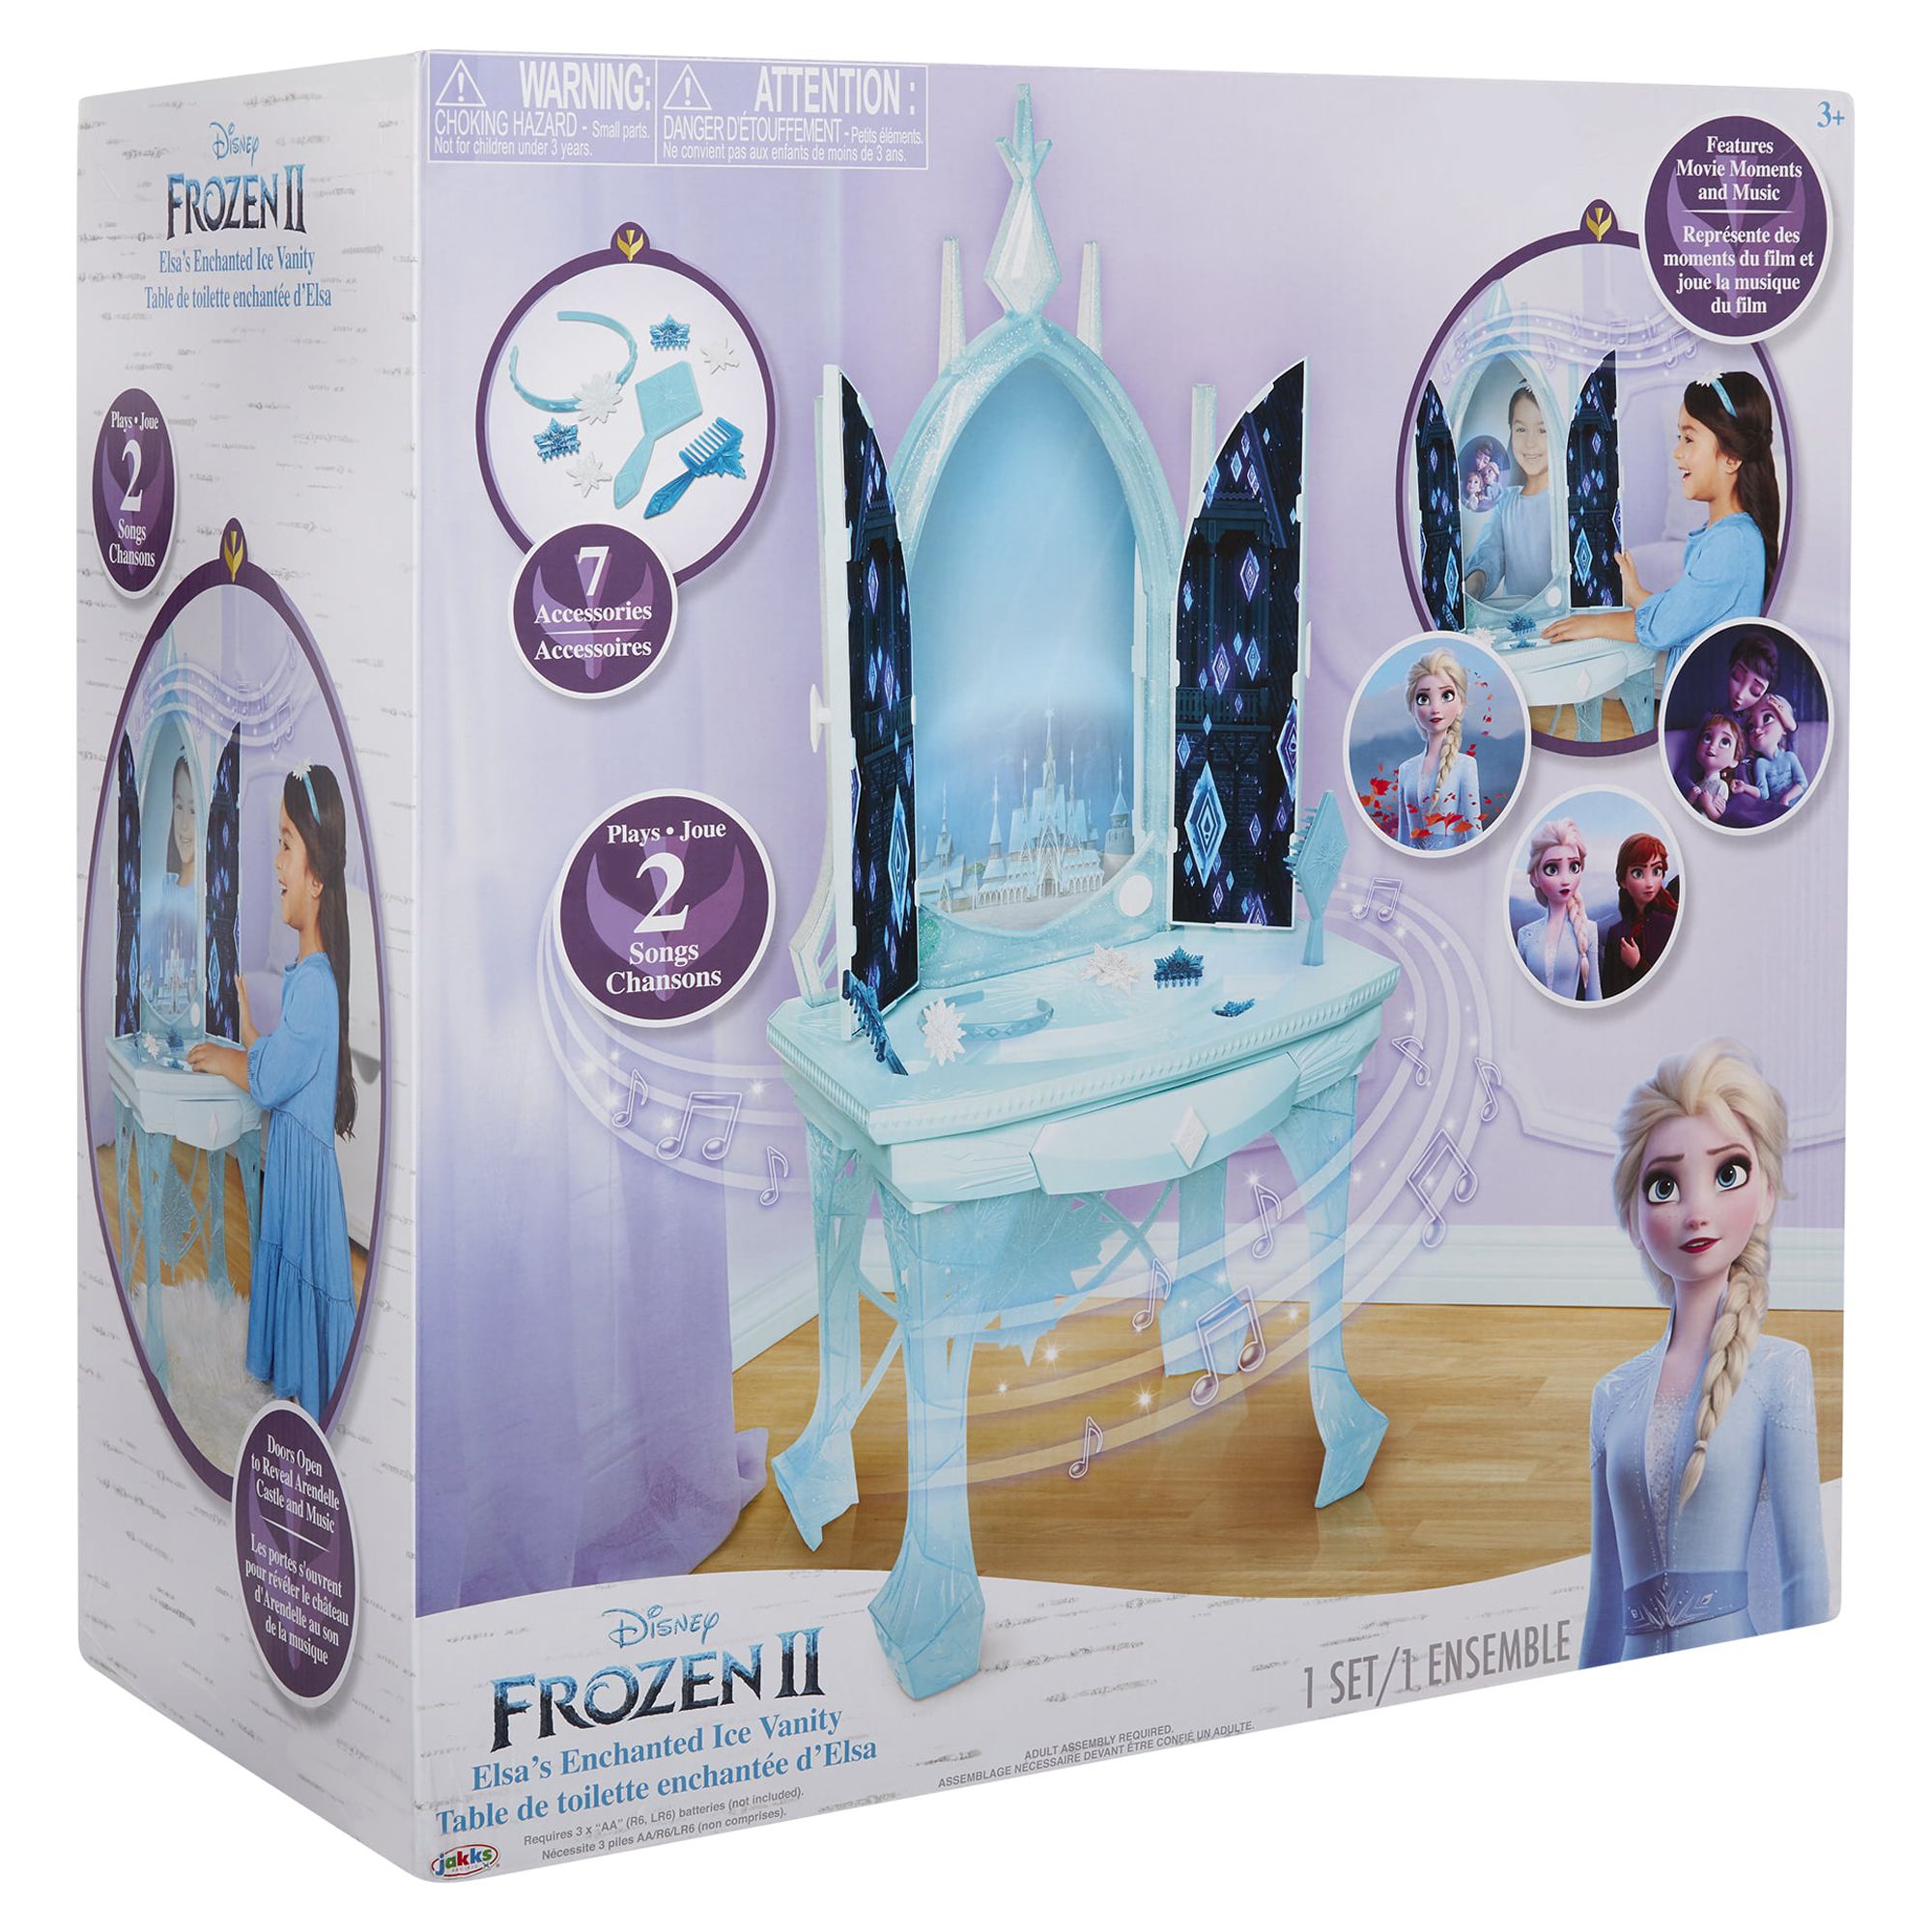 Disney Frozen 2 Elsa's Enchanted Ice Vanity Includes Lights Iconic Story Moments & Plays "Vuelie" and "Into the Unknown" For Ages 3+ - image 5 of 6